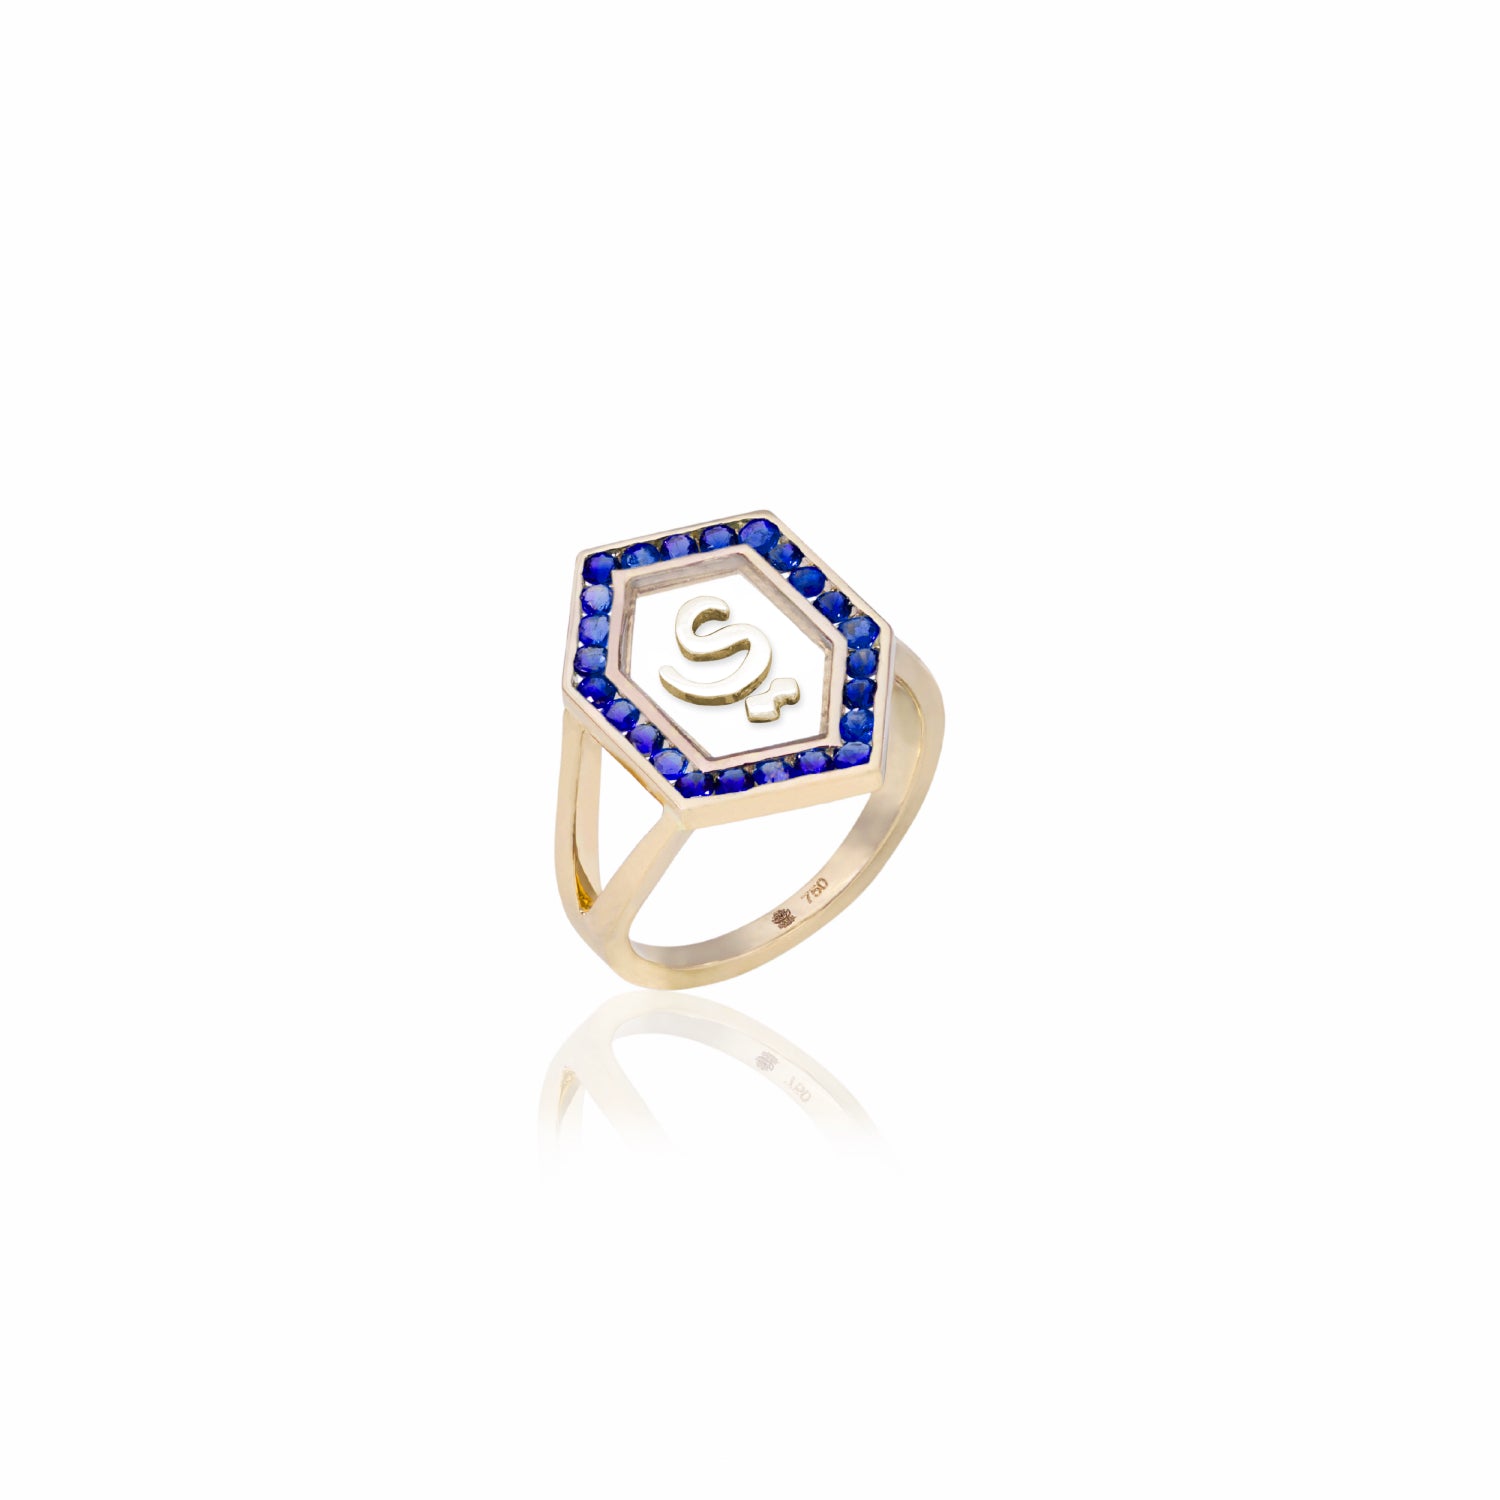 Qamoos 1.0 Letter ي Sapphire Ring in Yellow Gold